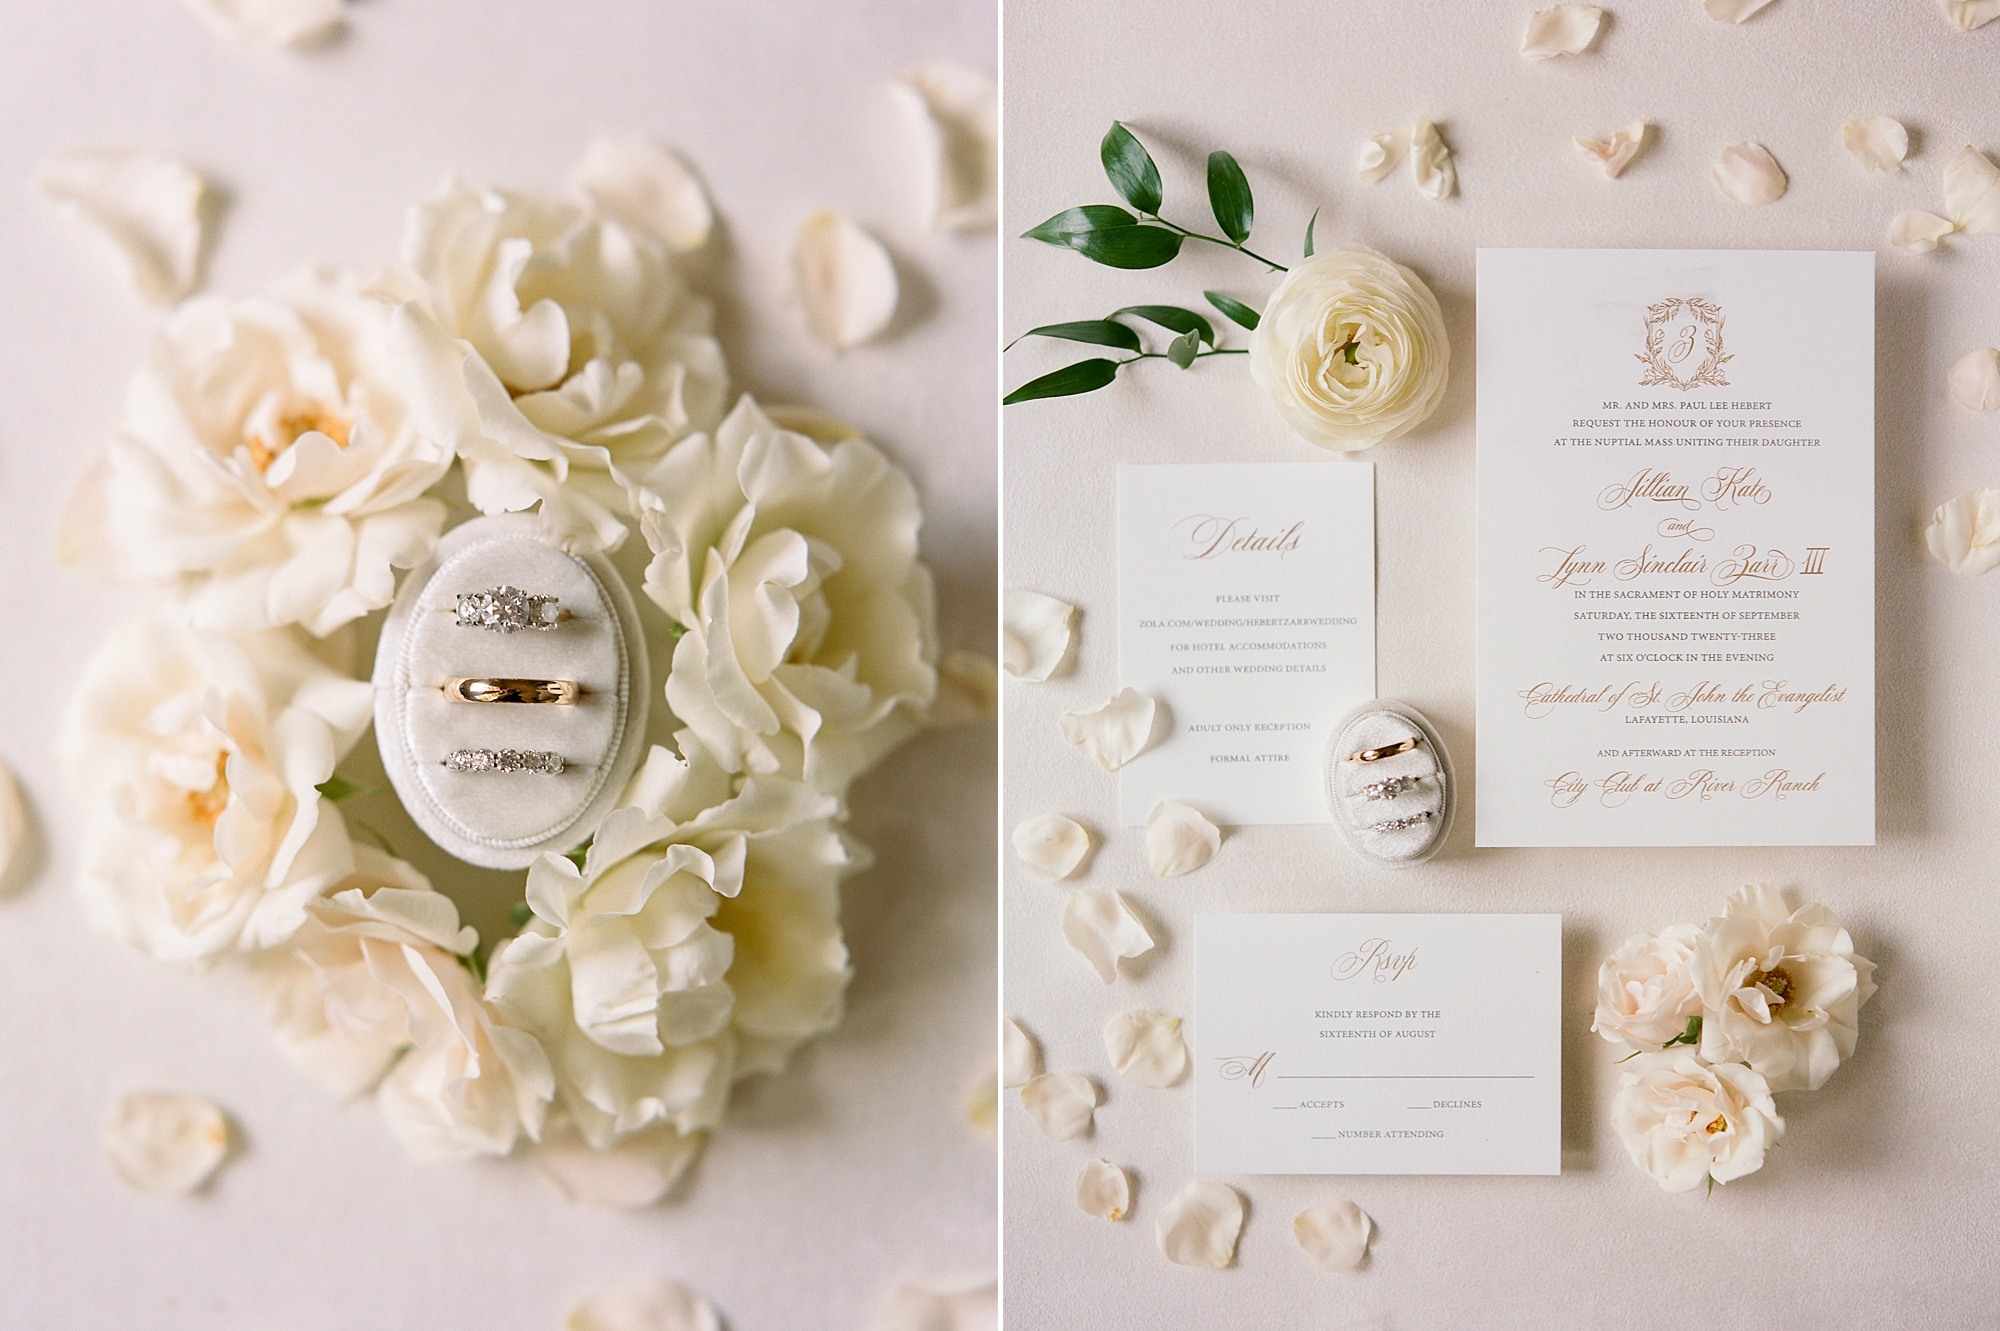 elegant ivory and gold invitation suite with wedding rings in white flowers 